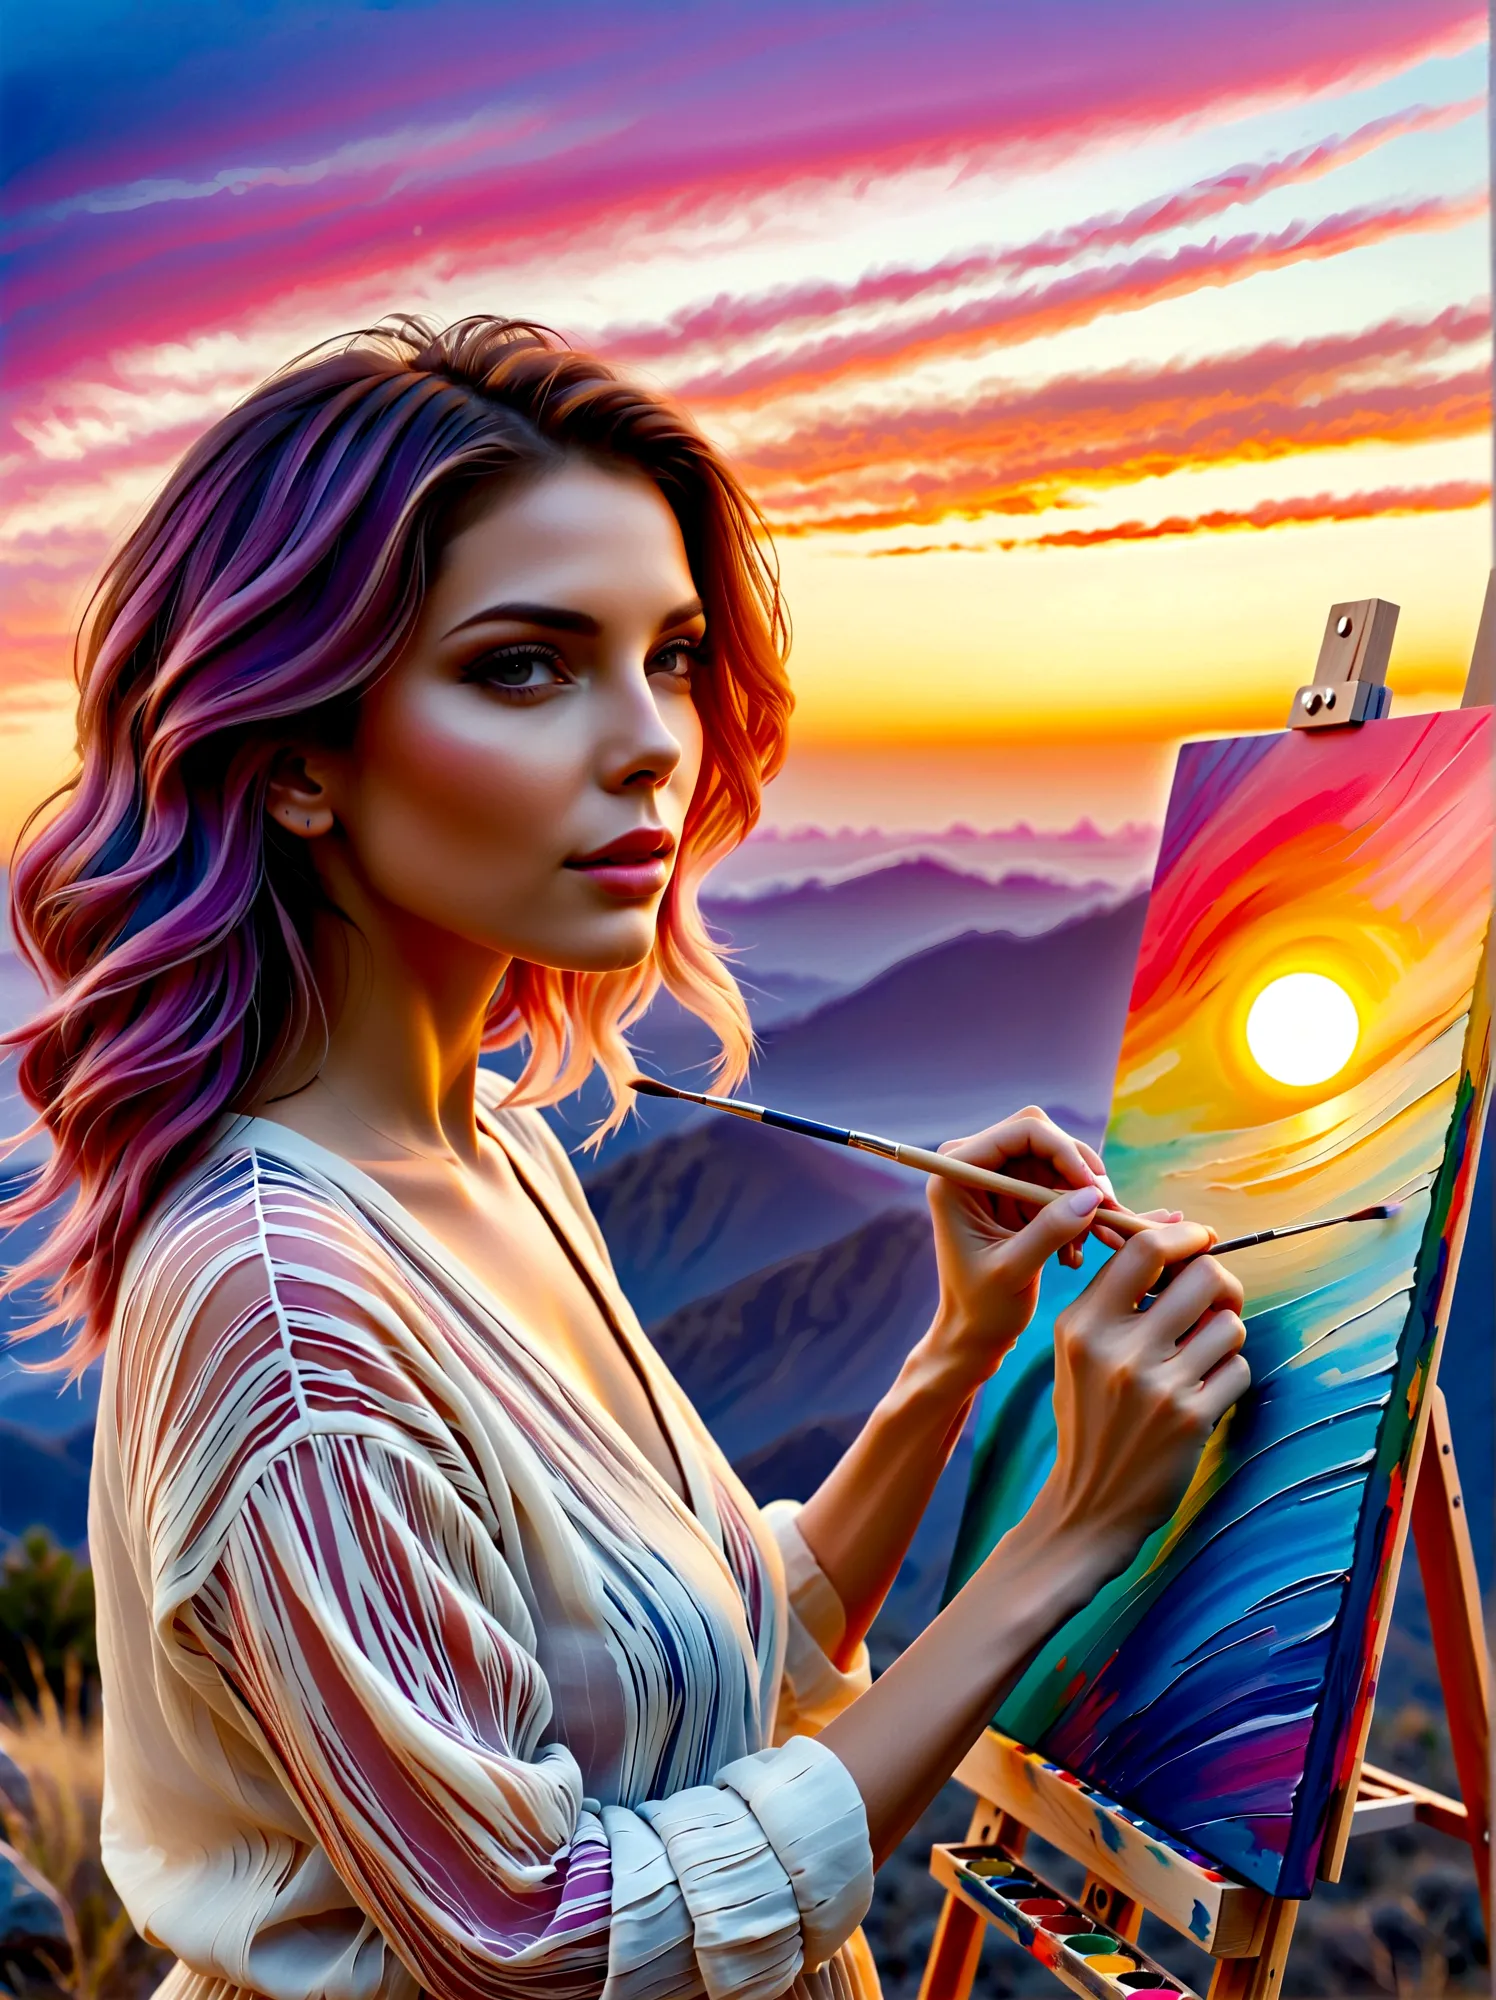 (Sunrise Time:1.6), A middle-aged Caucasian woman dressed in casual clothing is standing in front of a canvas placed on an easel...